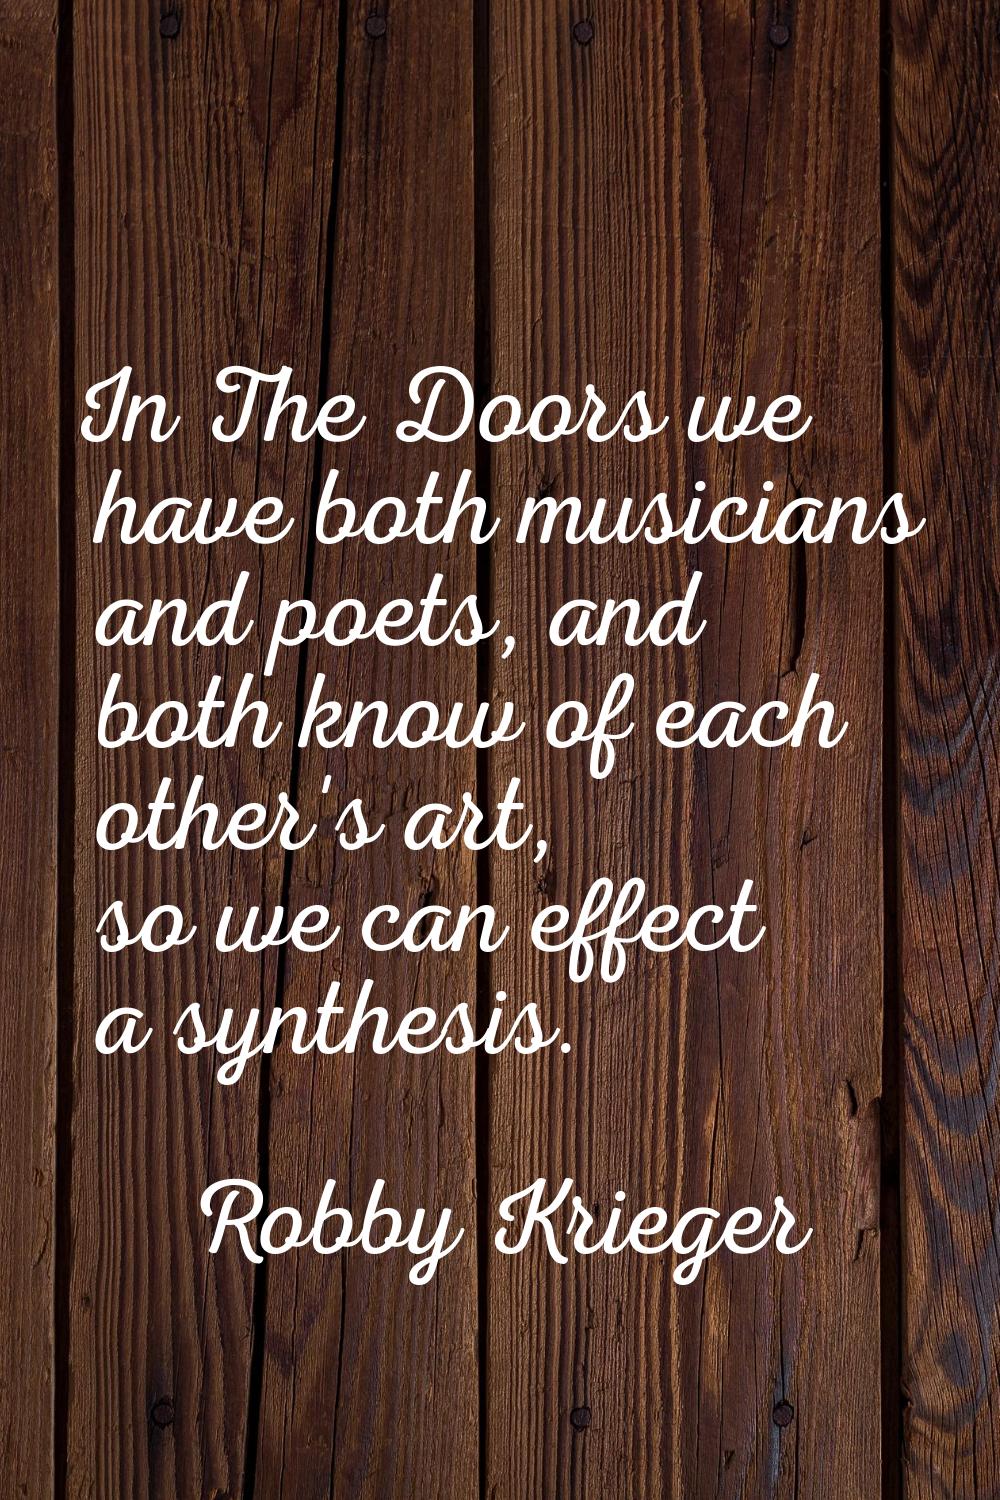 In The Doors we have both musicians and poets, and both know of each other's art, so we can effect 